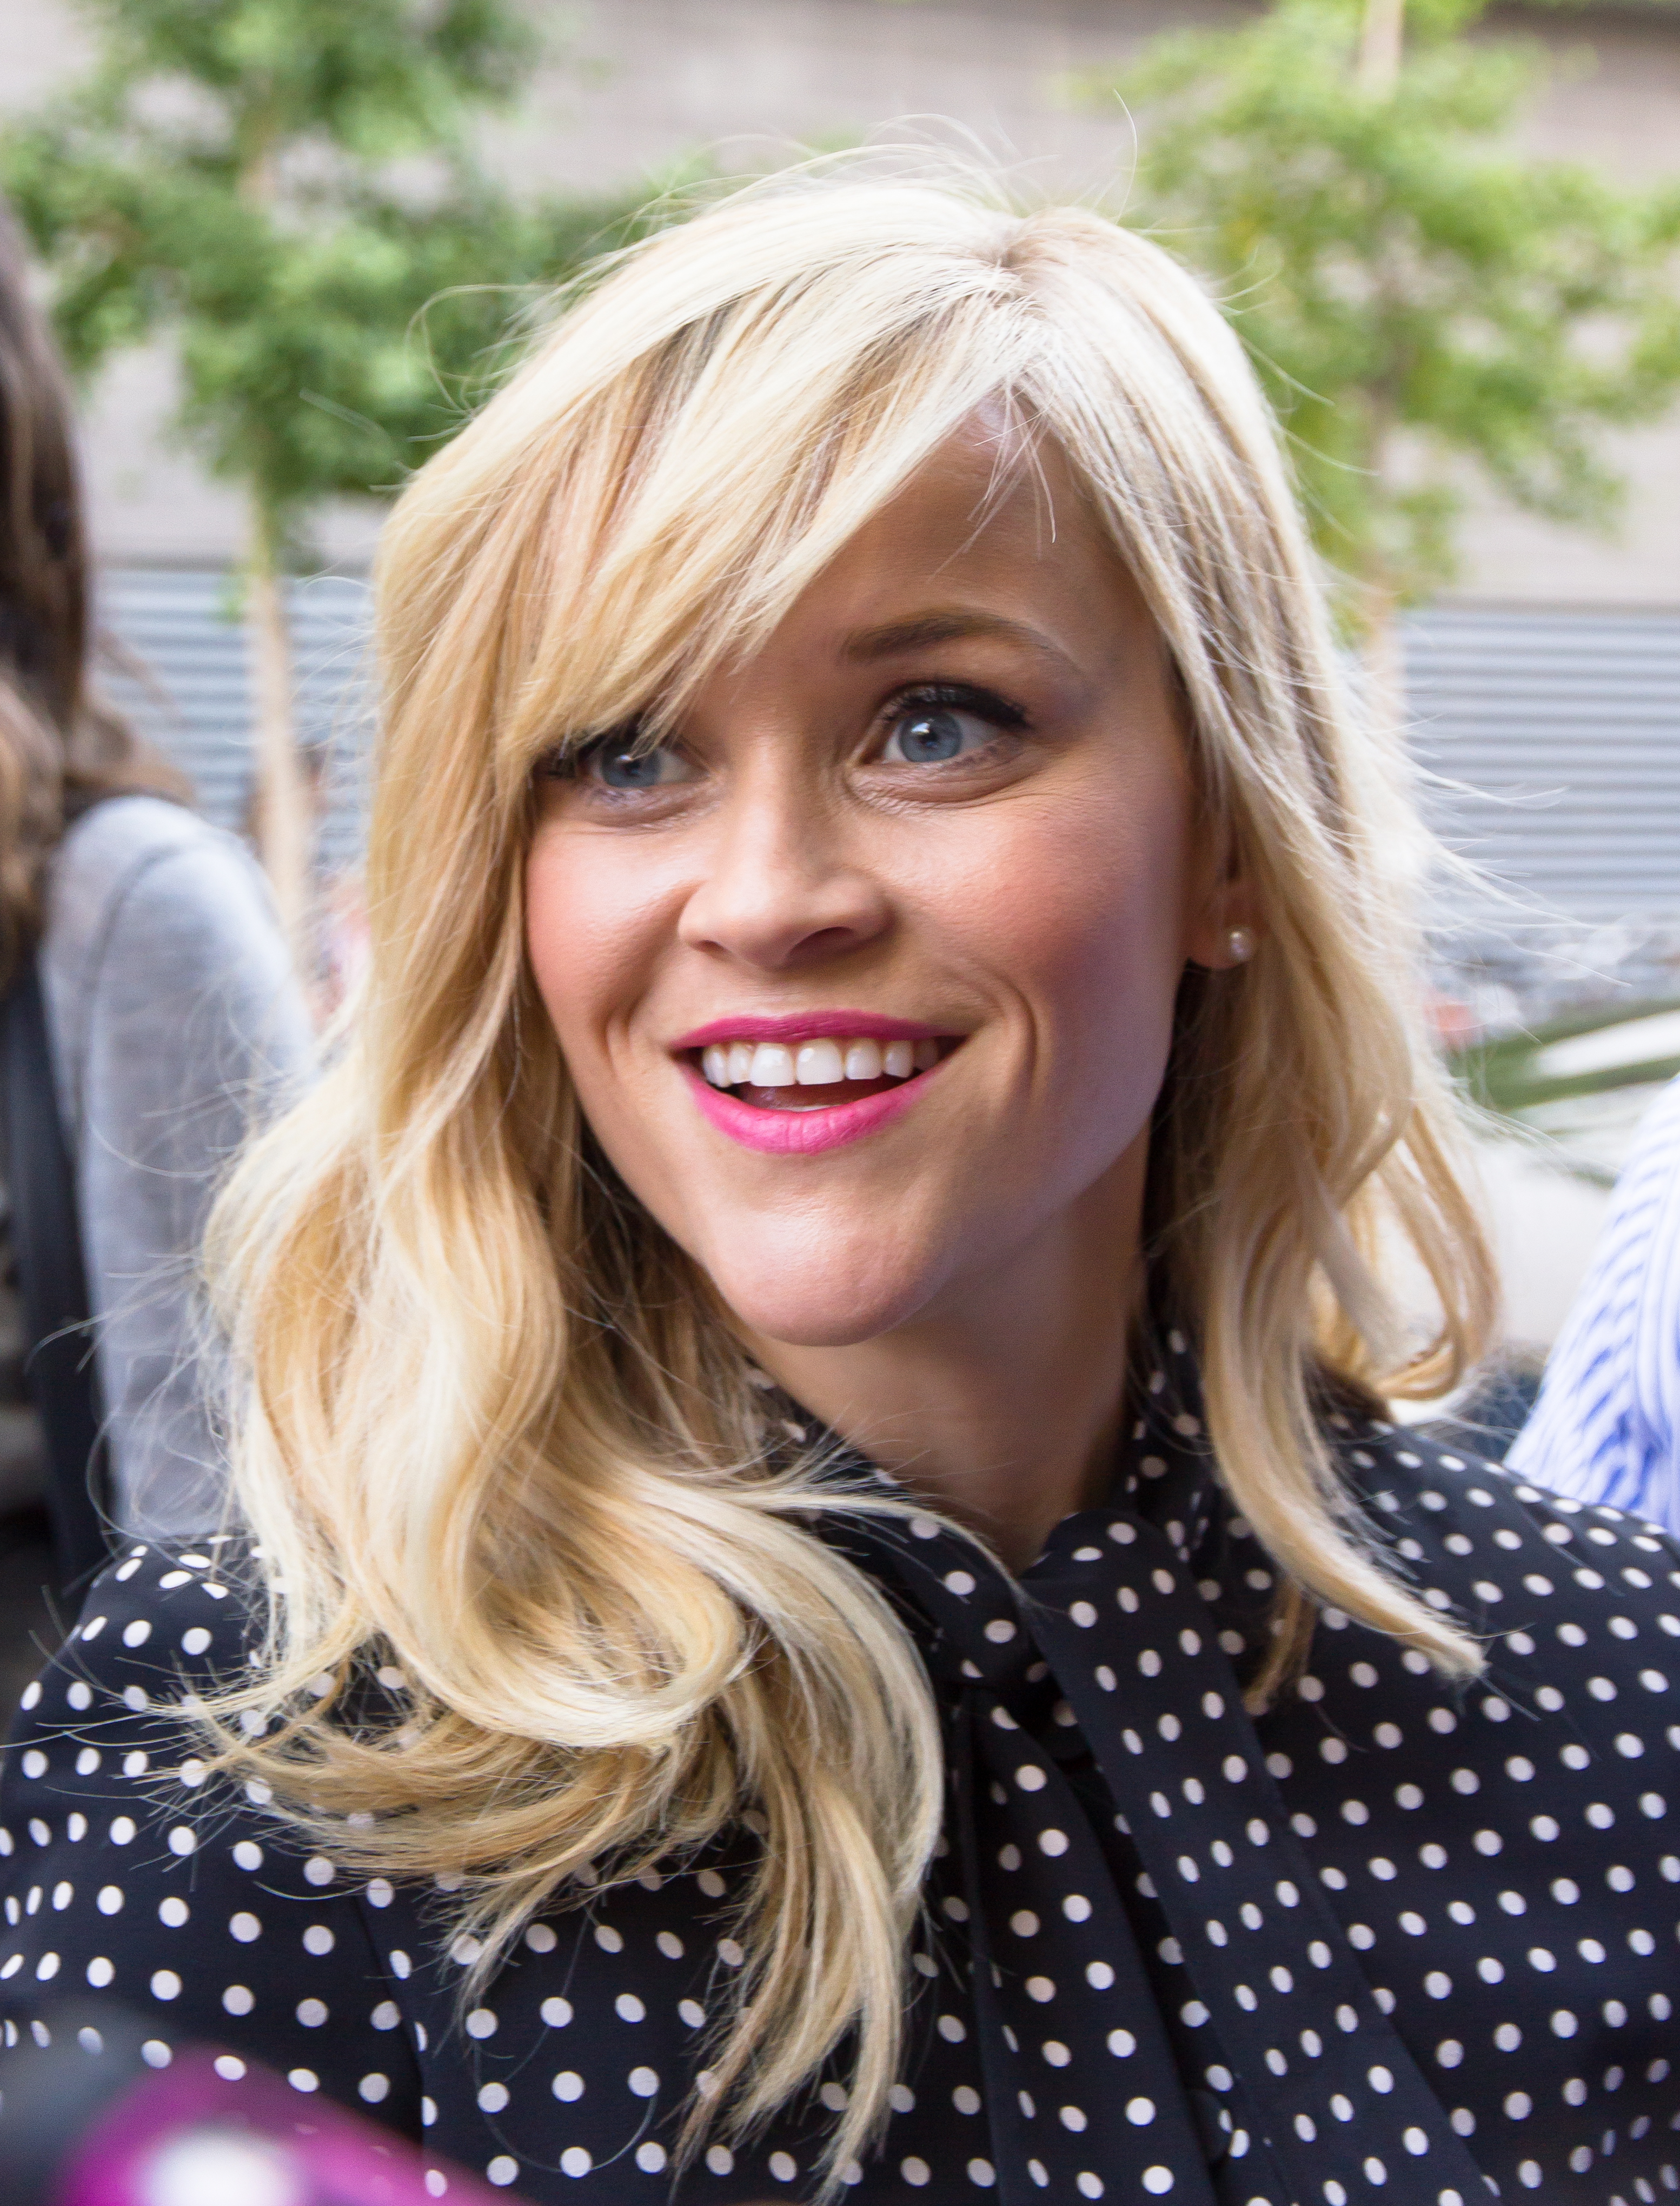 taille-reese-witherspoon-Image